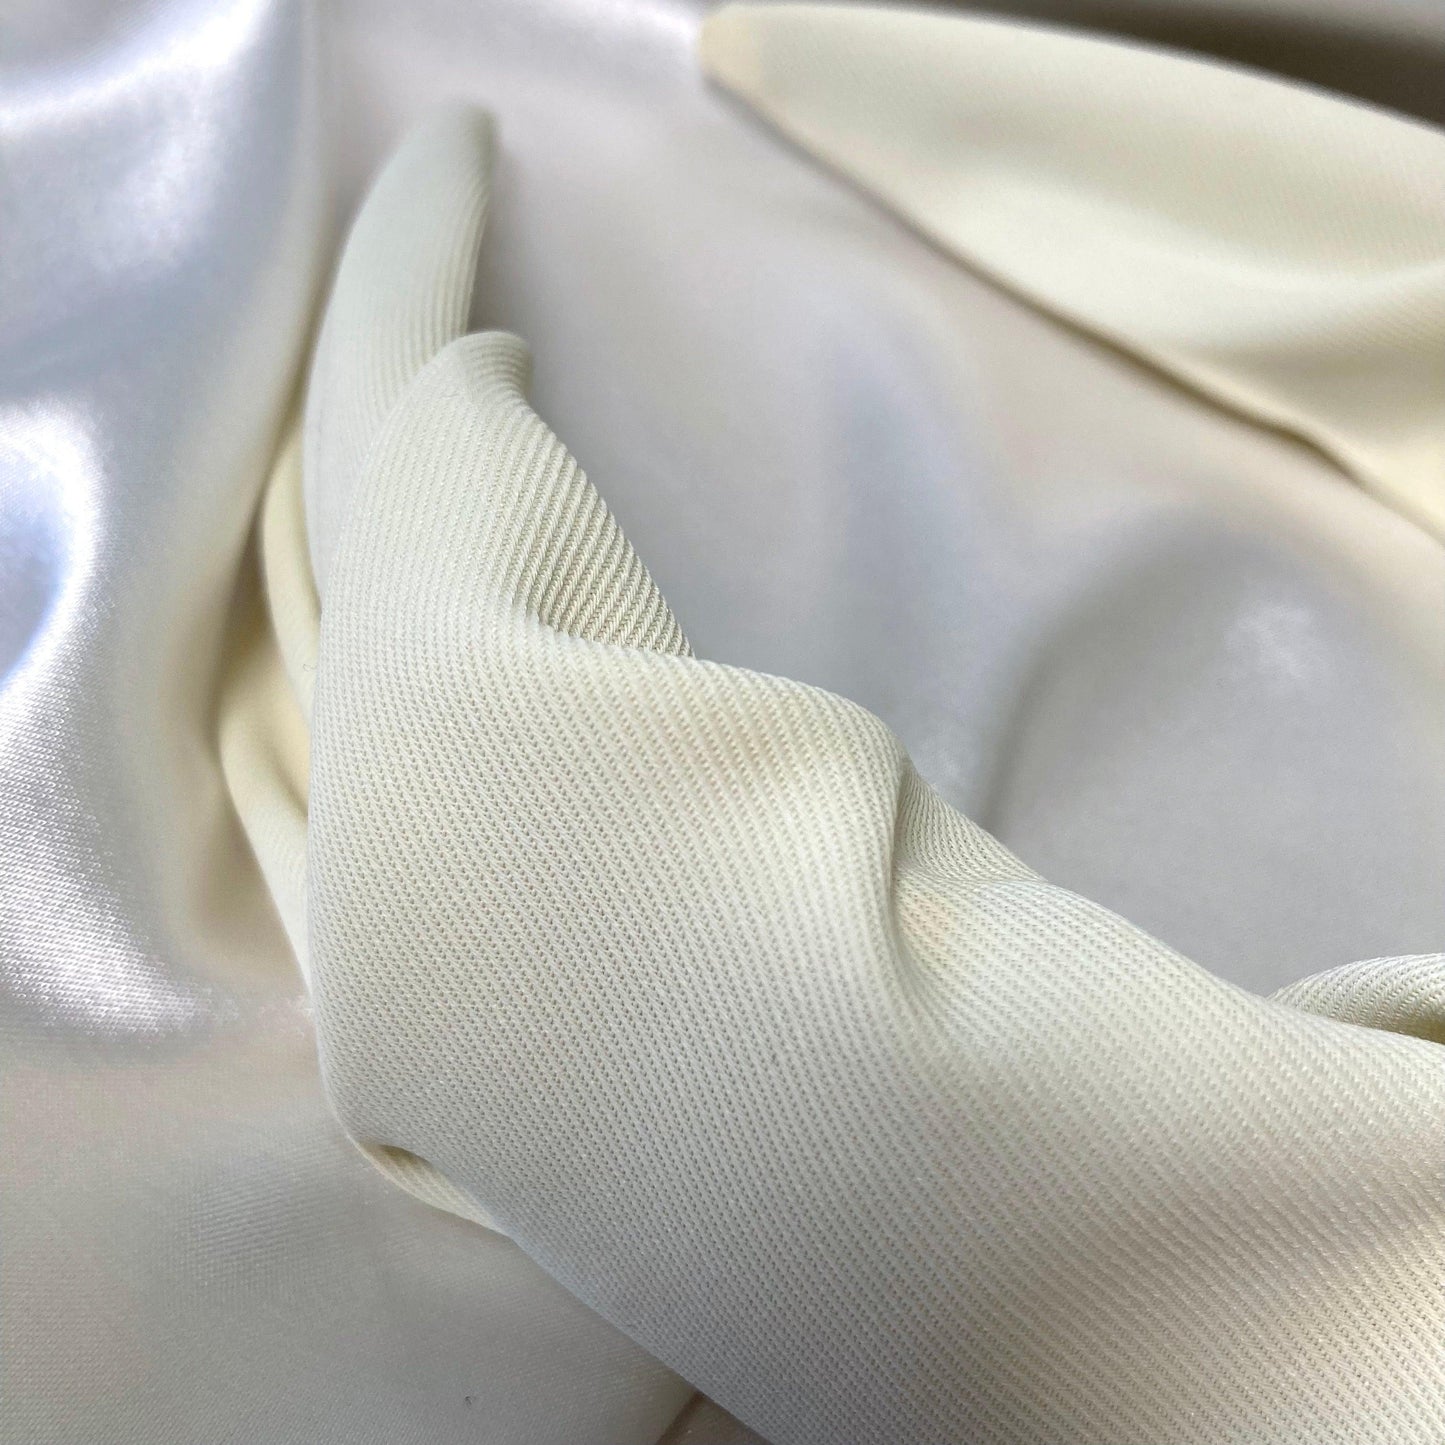 A close up of the premium cream / ivory material on the headband